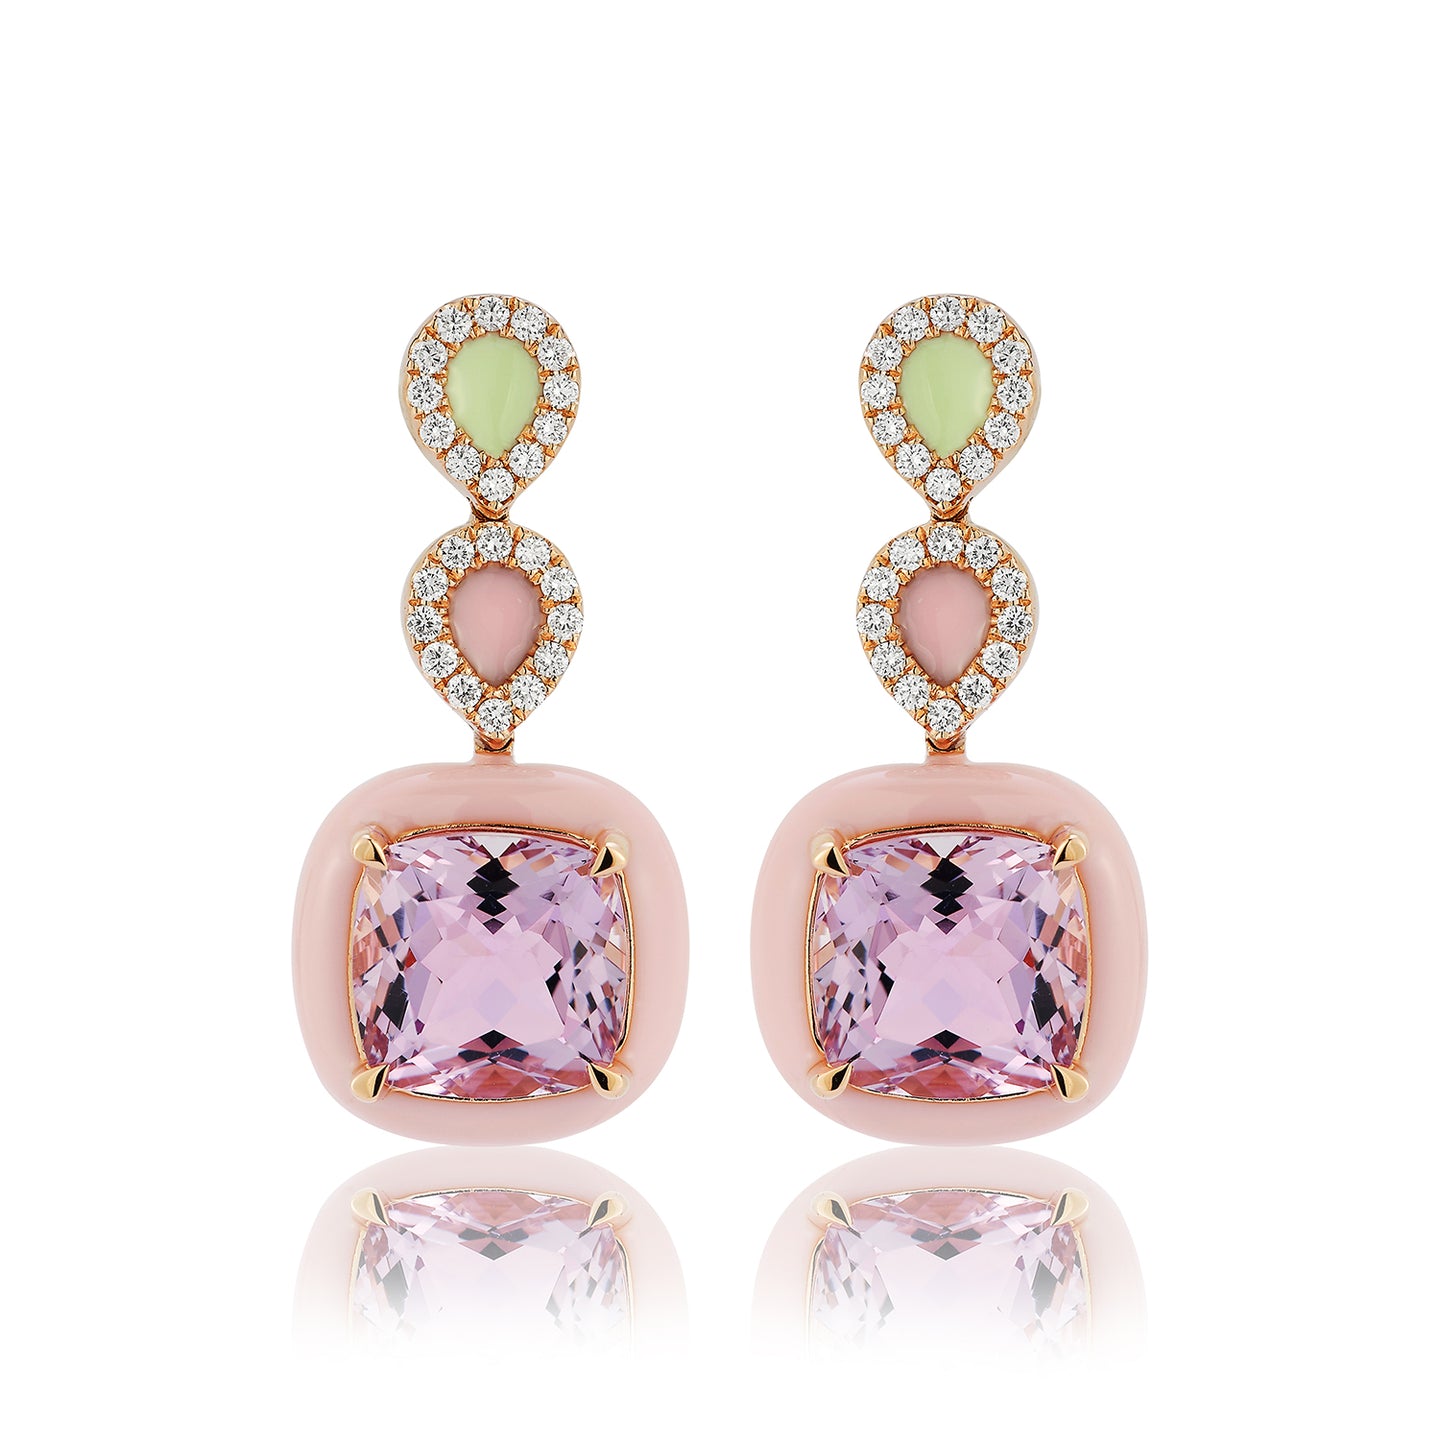 Candy Pink and Green Enamel Earrings with Amethyst and Diamonds